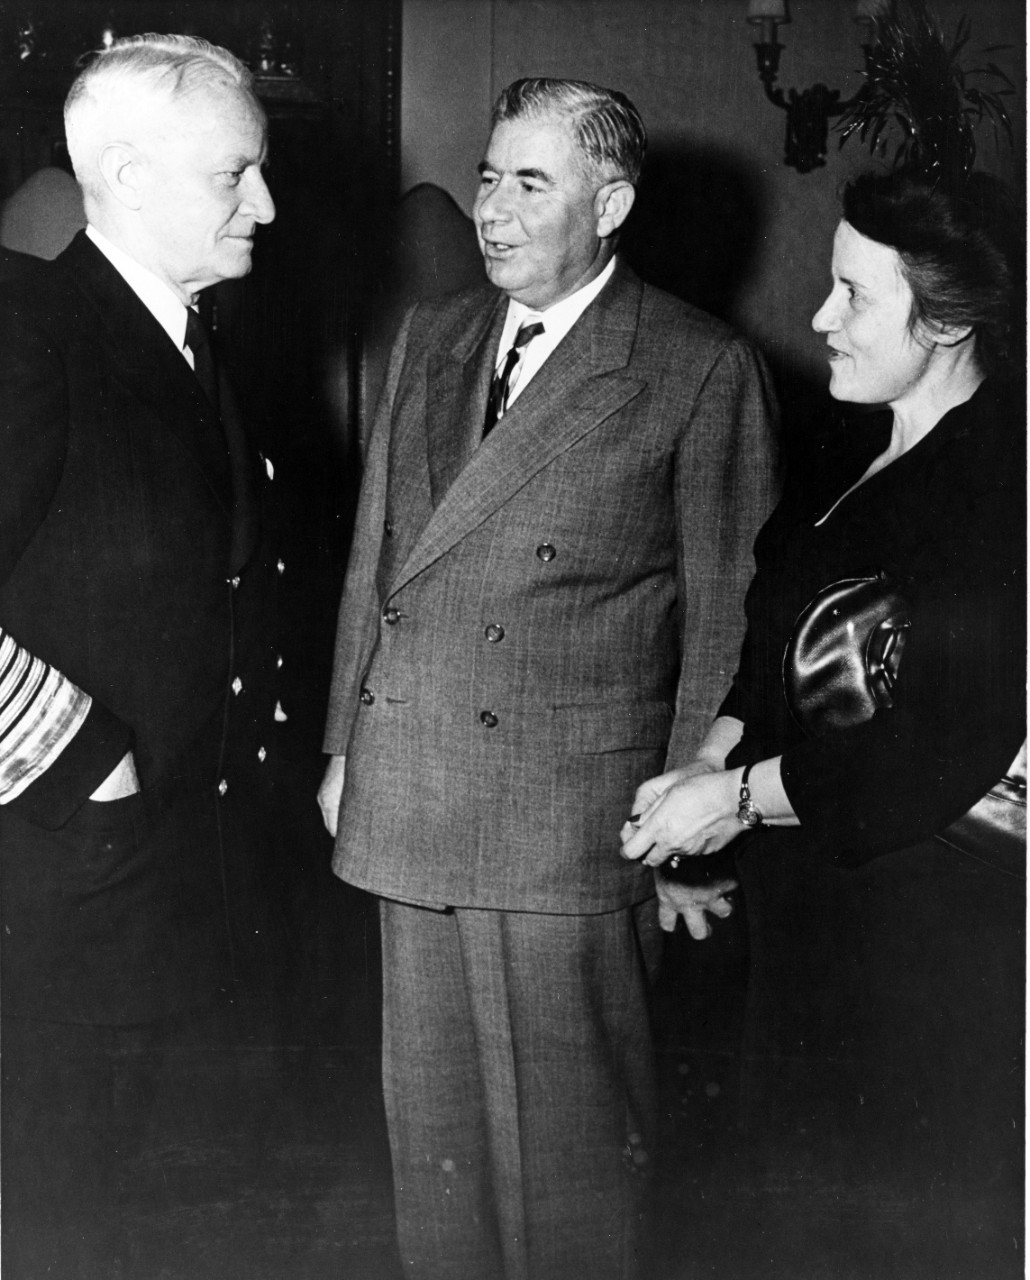 Admiral Nimitz chats with guests at farewell retirement party